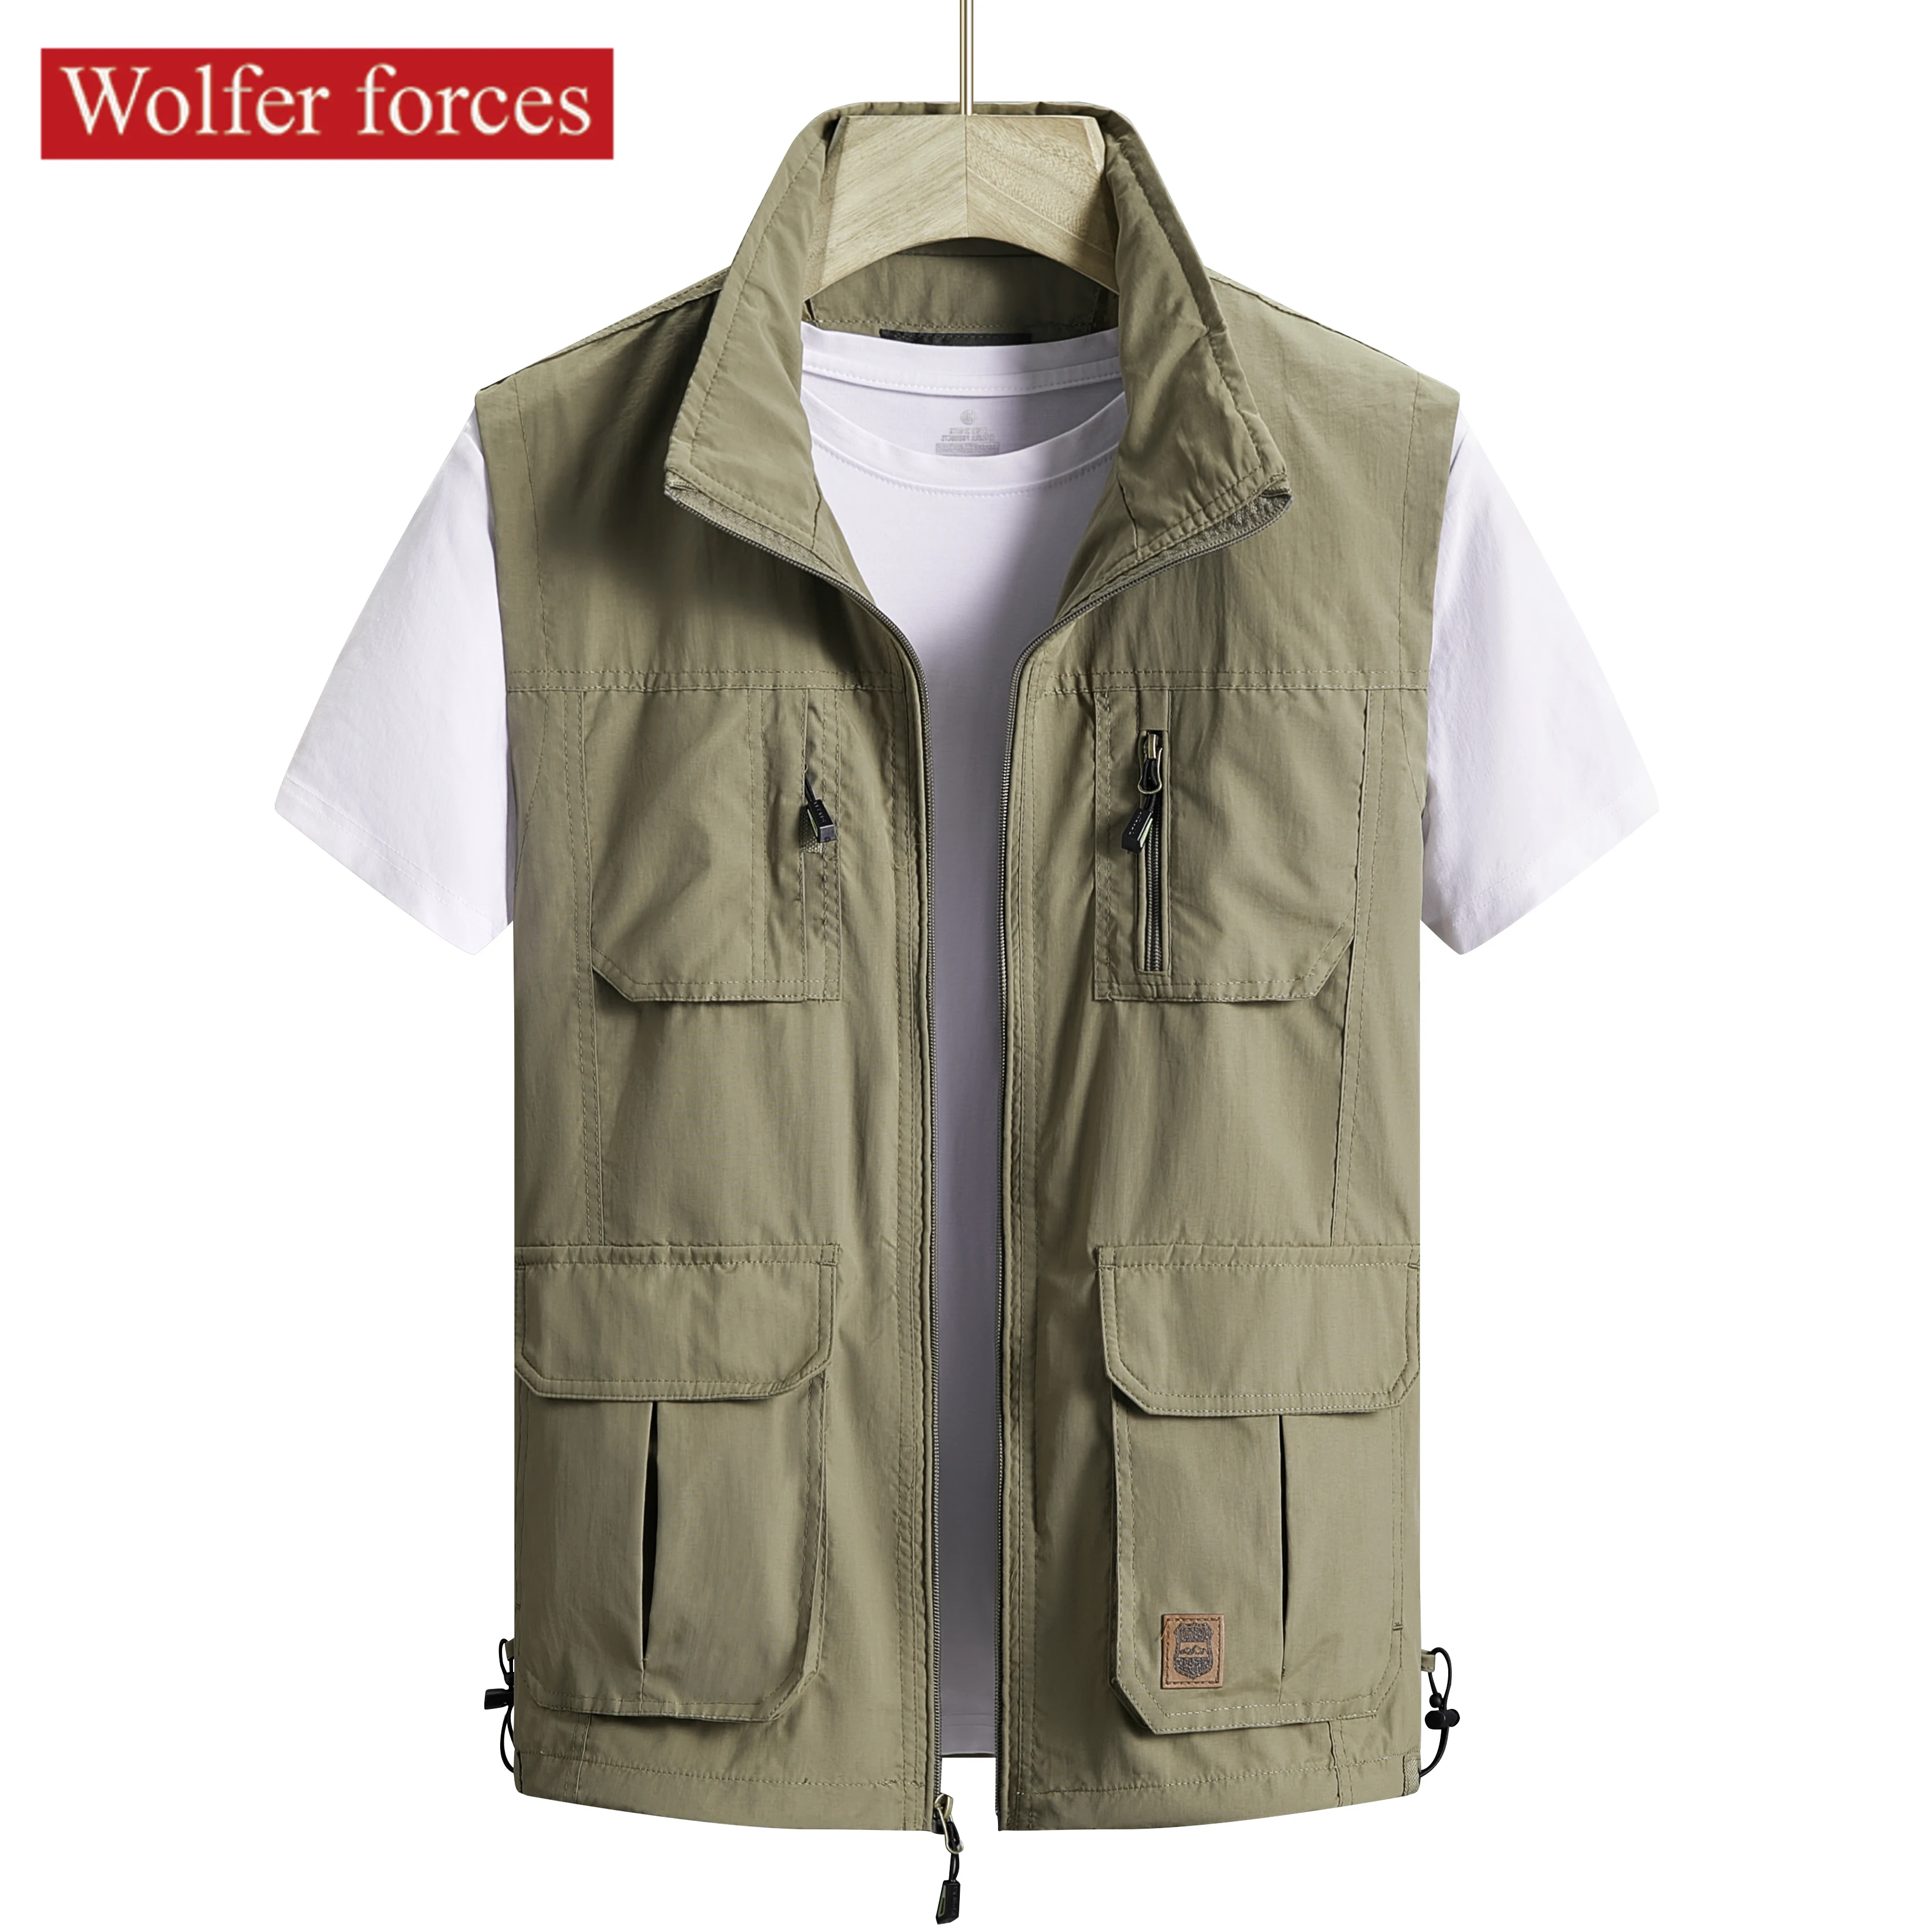 Outdoor Fishing Wear Waterproof Motorcyclist Vest Tactical Trekking Cardigan Military Mesh Elegant Tools Pocket tactical army half finger gloves military paintball airsoft shooting combat fishing protective fingerless glove anti skid men